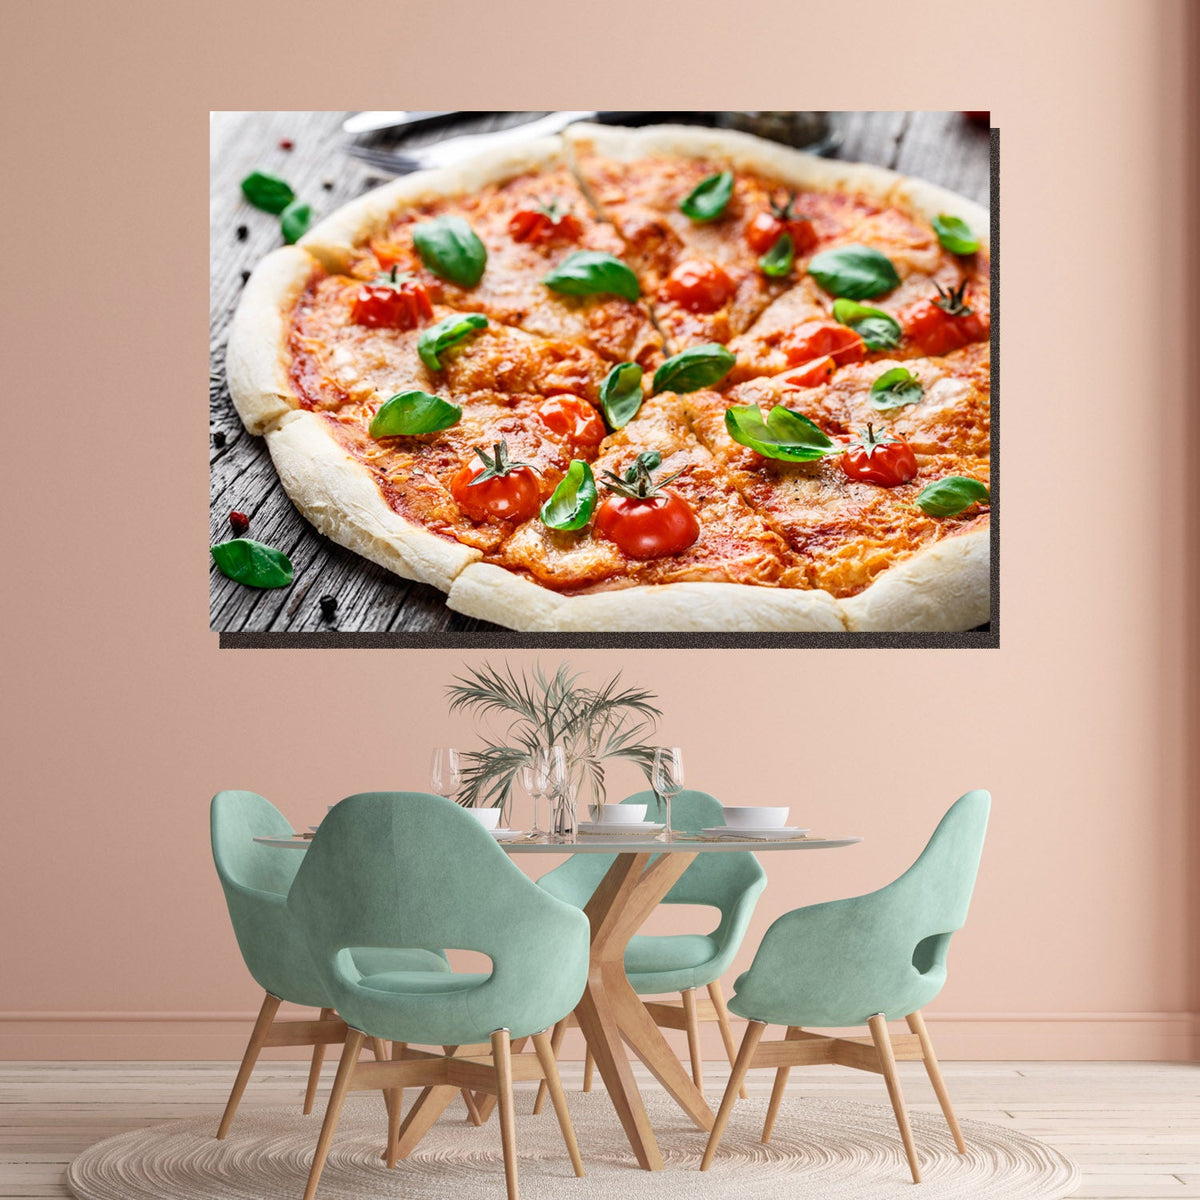 https://cdn.shopify.com/s/files/1/0387/9986/8044/products/PizzaPartyCanvasArtprintStretched-3.jpg